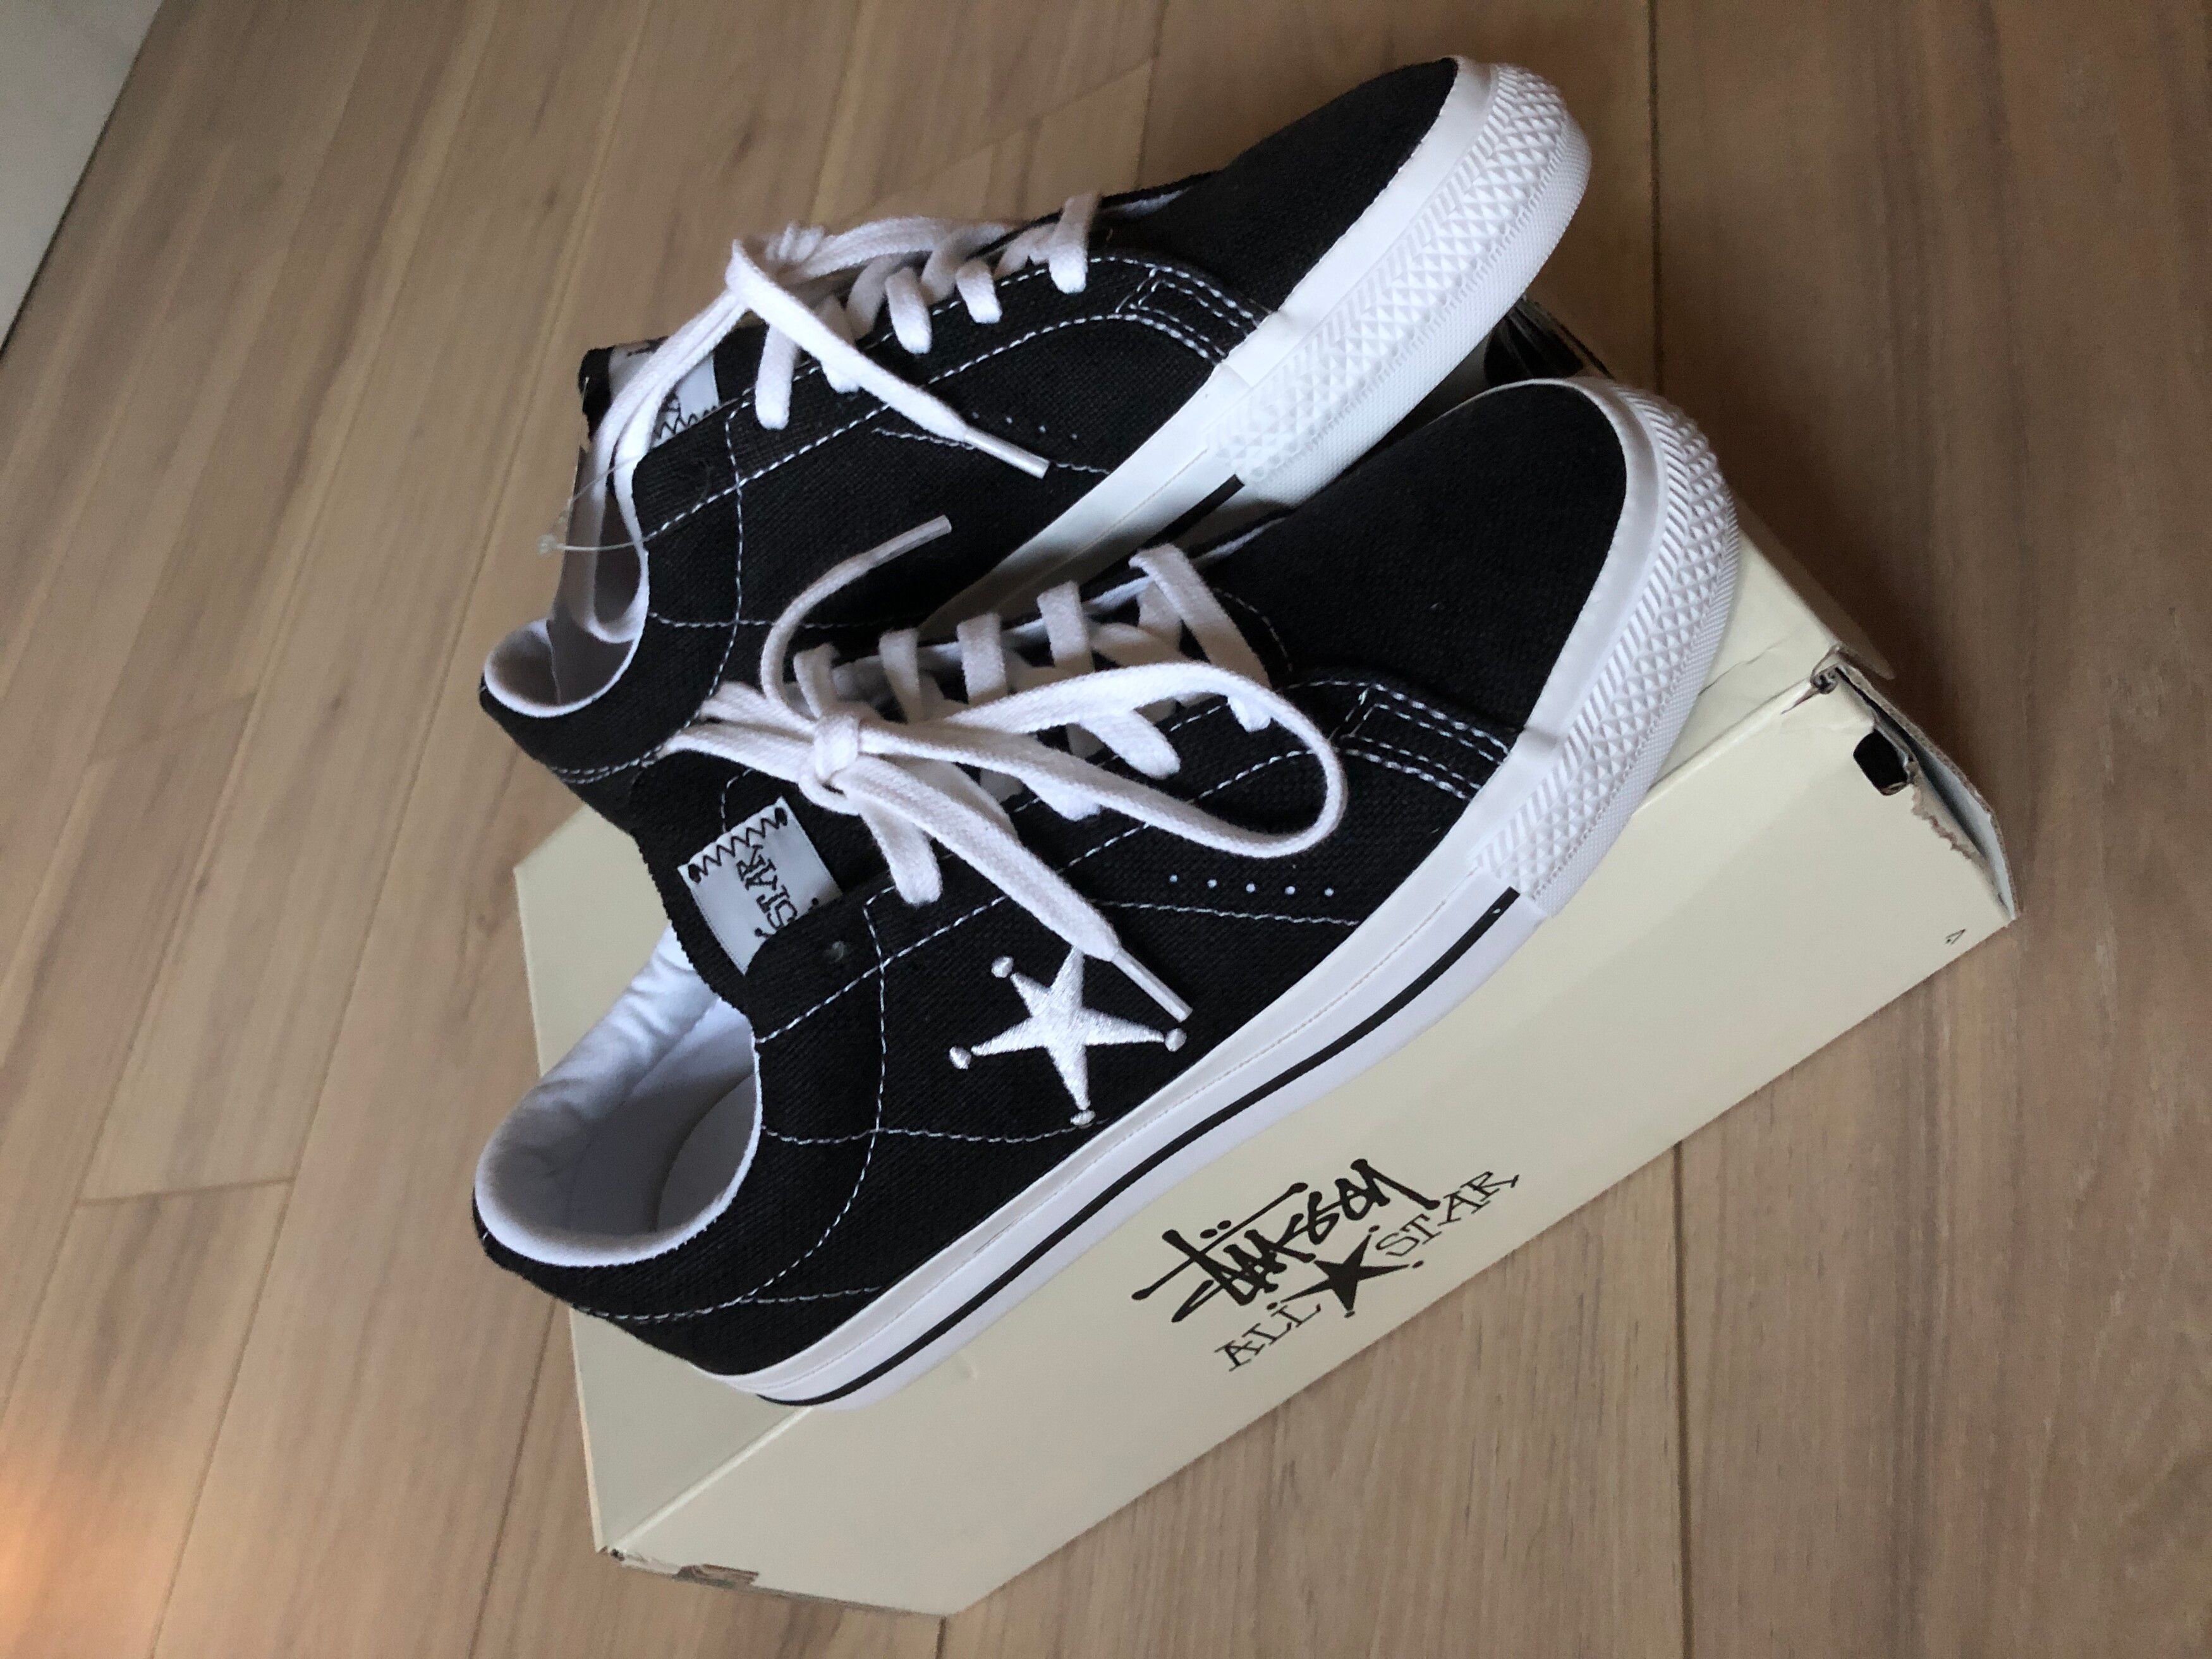 Stussy Converse x Stussy One Star Low Size US 5 / EU 37 - 1 Preview